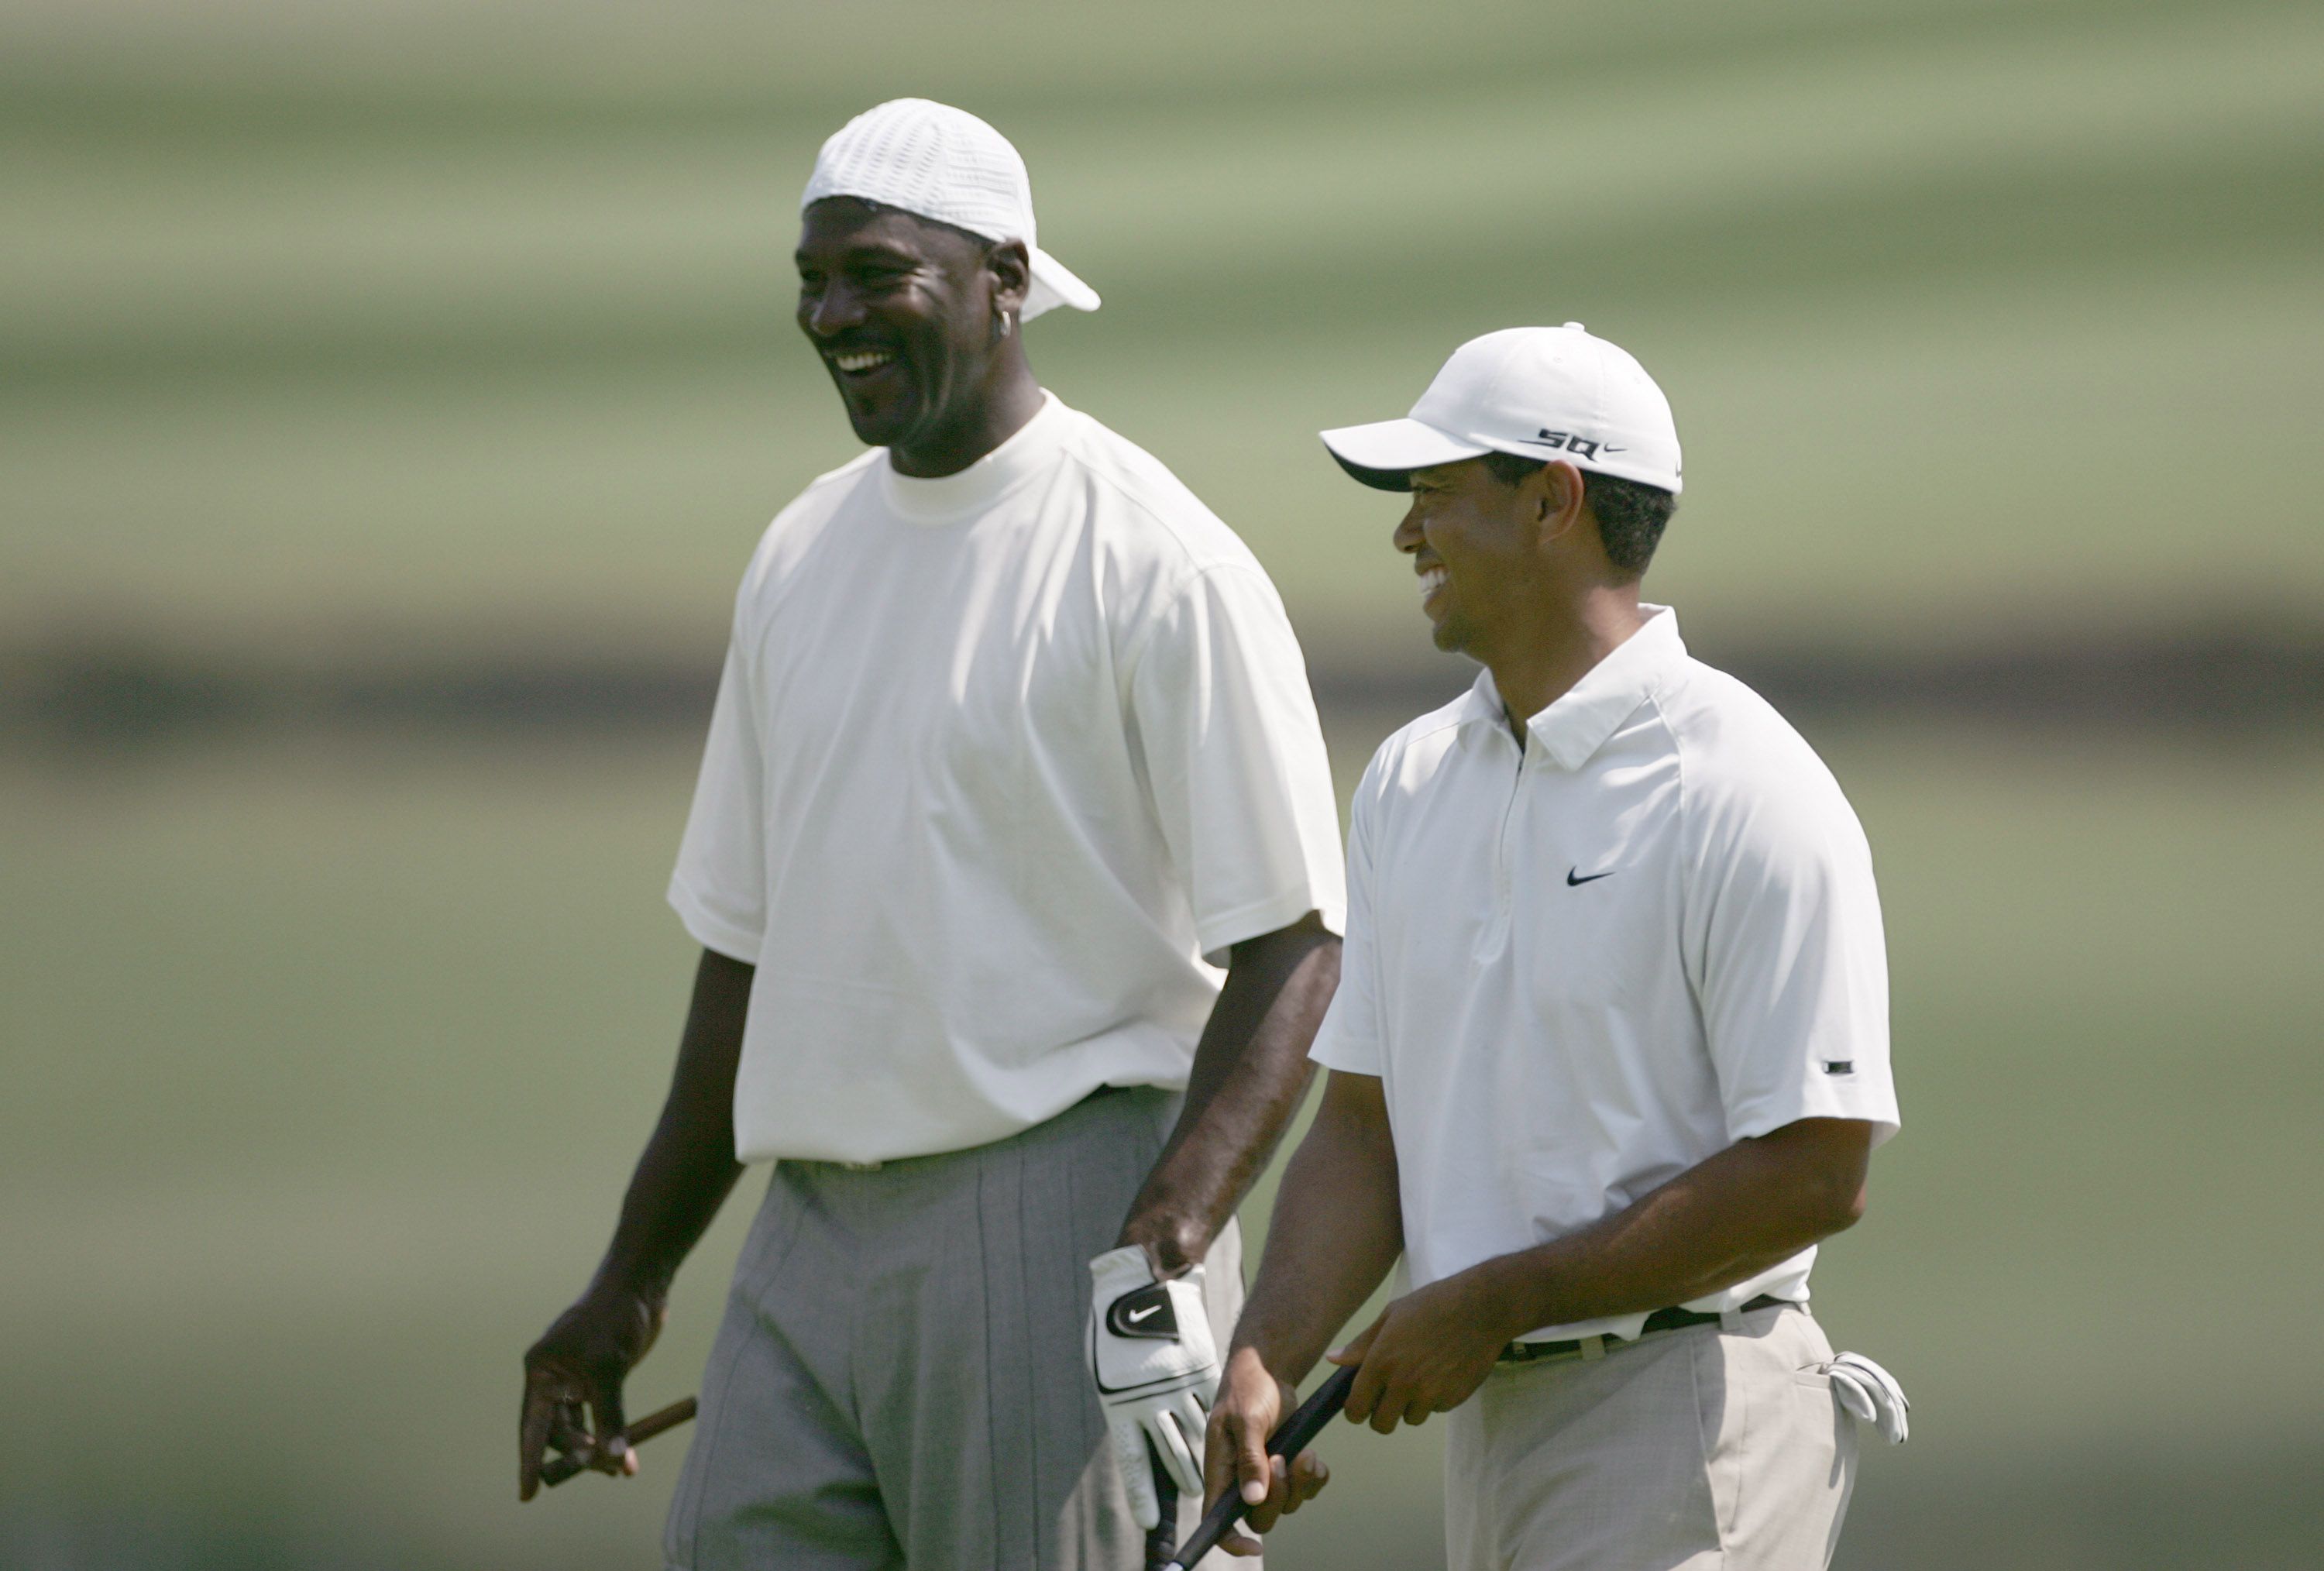 Who Was Better in Their Prime - Michael Jordan or Tiger Woods